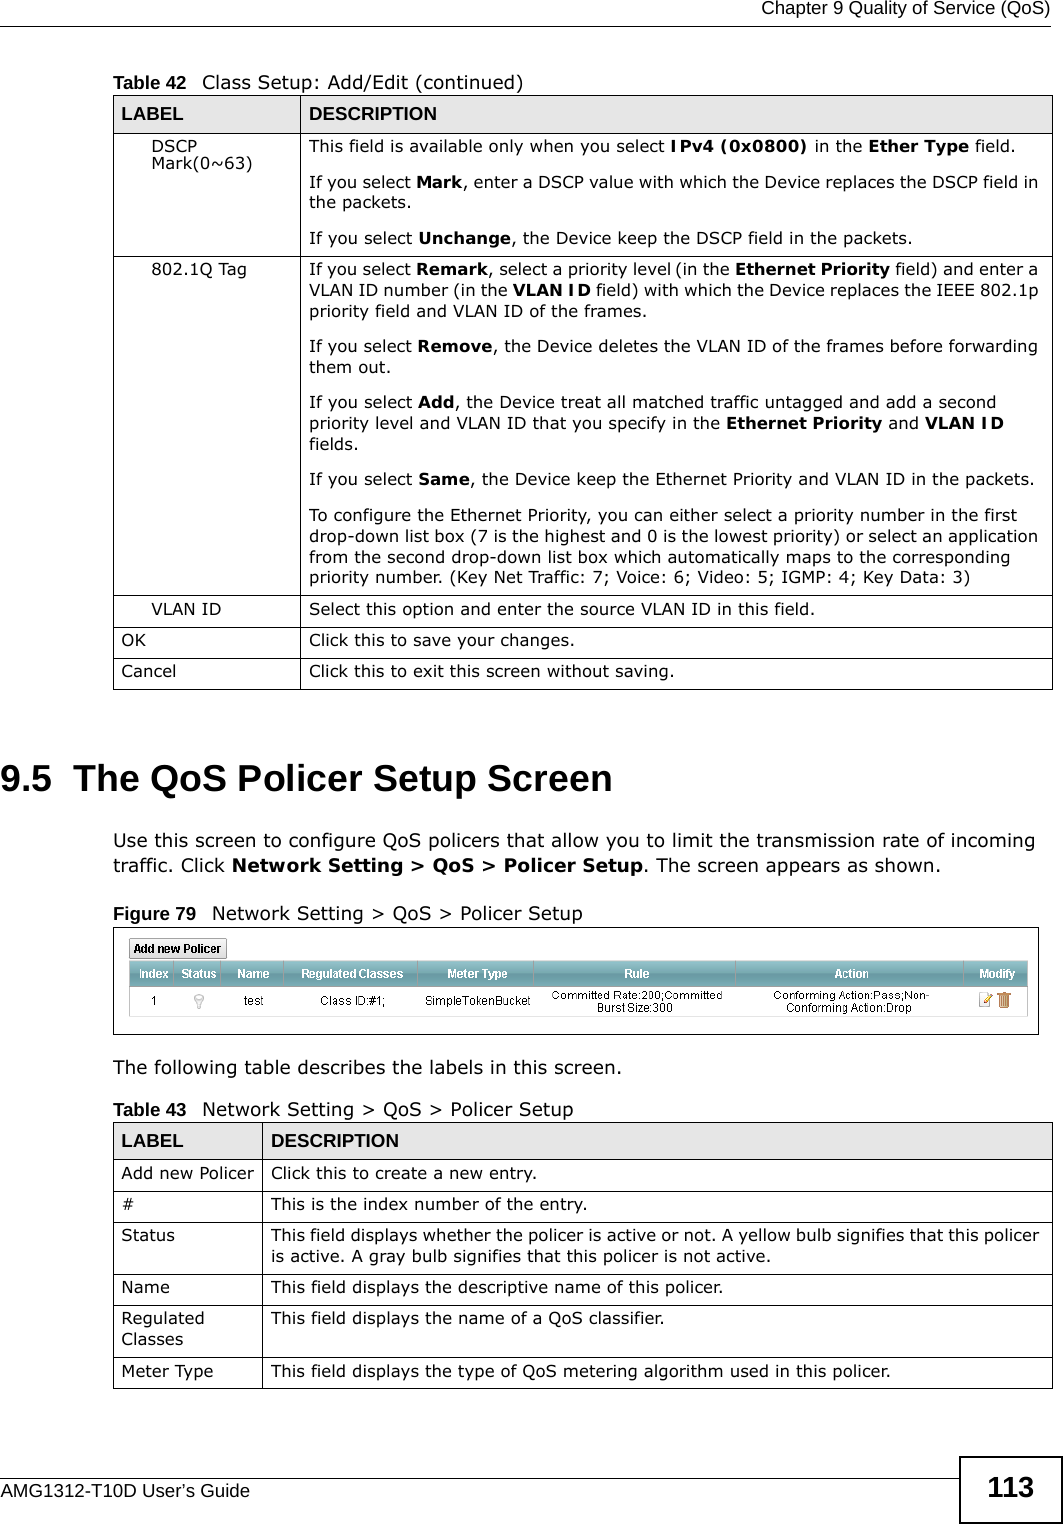  Chapter 9 Quality of Service (QoS)AMG1312-T10D User’s Guide 1139.5  The QoS Policer Setup ScreenUse this screen to configure QoS policers that allow you to limit the transmission rate of incoming traffic. Click Network Setting &gt; QoS &gt; Policer Setup. The screen appears as shown. Figure 79   Network Setting &gt; QoS &gt; Policer Setup The following table describes the labels in this screen.  DSCP Mark(0~63) This field is available only when you select IPv4 (0x0800) in the Ether Type field.If you select Mark, enter a DSCP value with which the Device replaces the DSCP field in the packets.If you select Unchange, the Device keep the DSCP field in the packets.802.1Q Tag If you select Remark, select a priority level (in the Ethernet Priority field) and enter a VLAN ID number (in the VLAN ID field) with which the Device replaces the IEEE 802.1p priority field and VLAN ID of the frames.If you select Remove, the Device deletes the VLAN ID of the frames before forwarding them out.If you select Add, the Device treat all matched traffic untagged and add a second priority level and VLAN ID that you specify in the Ethernet Priority and VLAN ID fields.If you select Same, the Device keep the Ethernet Priority and VLAN ID in the packets.To configure the Ethernet Priority, you can either select a priority number in the first drop-down list box (7 is the highest and 0 is the lowest priority) or select an application from the second drop-down list box which automatically maps to the corresponding priority number. (Key Net Traffic: 7; Voice: 6; Video: 5; IGMP: 4; Key Data: 3)VLAN ID Select this option and enter the source VLAN ID in this field.OK Click this to save your changes.Cancel Click this to exit this screen without saving.Table 42   Class Setup: Add/Edit (continued)LABEL DESCRIPTIONTable 43   Network Setting &gt; QoS &gt; Policer SetupLABEL DESCRIPTIONAdd new Policer Click this to create a new entry.# This is the index number of the entry.Status This field displays whether the policer is active or not. A yellow bulb signifies that this policer is active. A gray bulb signifies that this policer is not active.Name This field displays the descriptive name of this policer.Regulated ClassesThis field displays the name of a QoS classifier.Meter Type This field displays the type of QoS metering algorithm used in this policer.